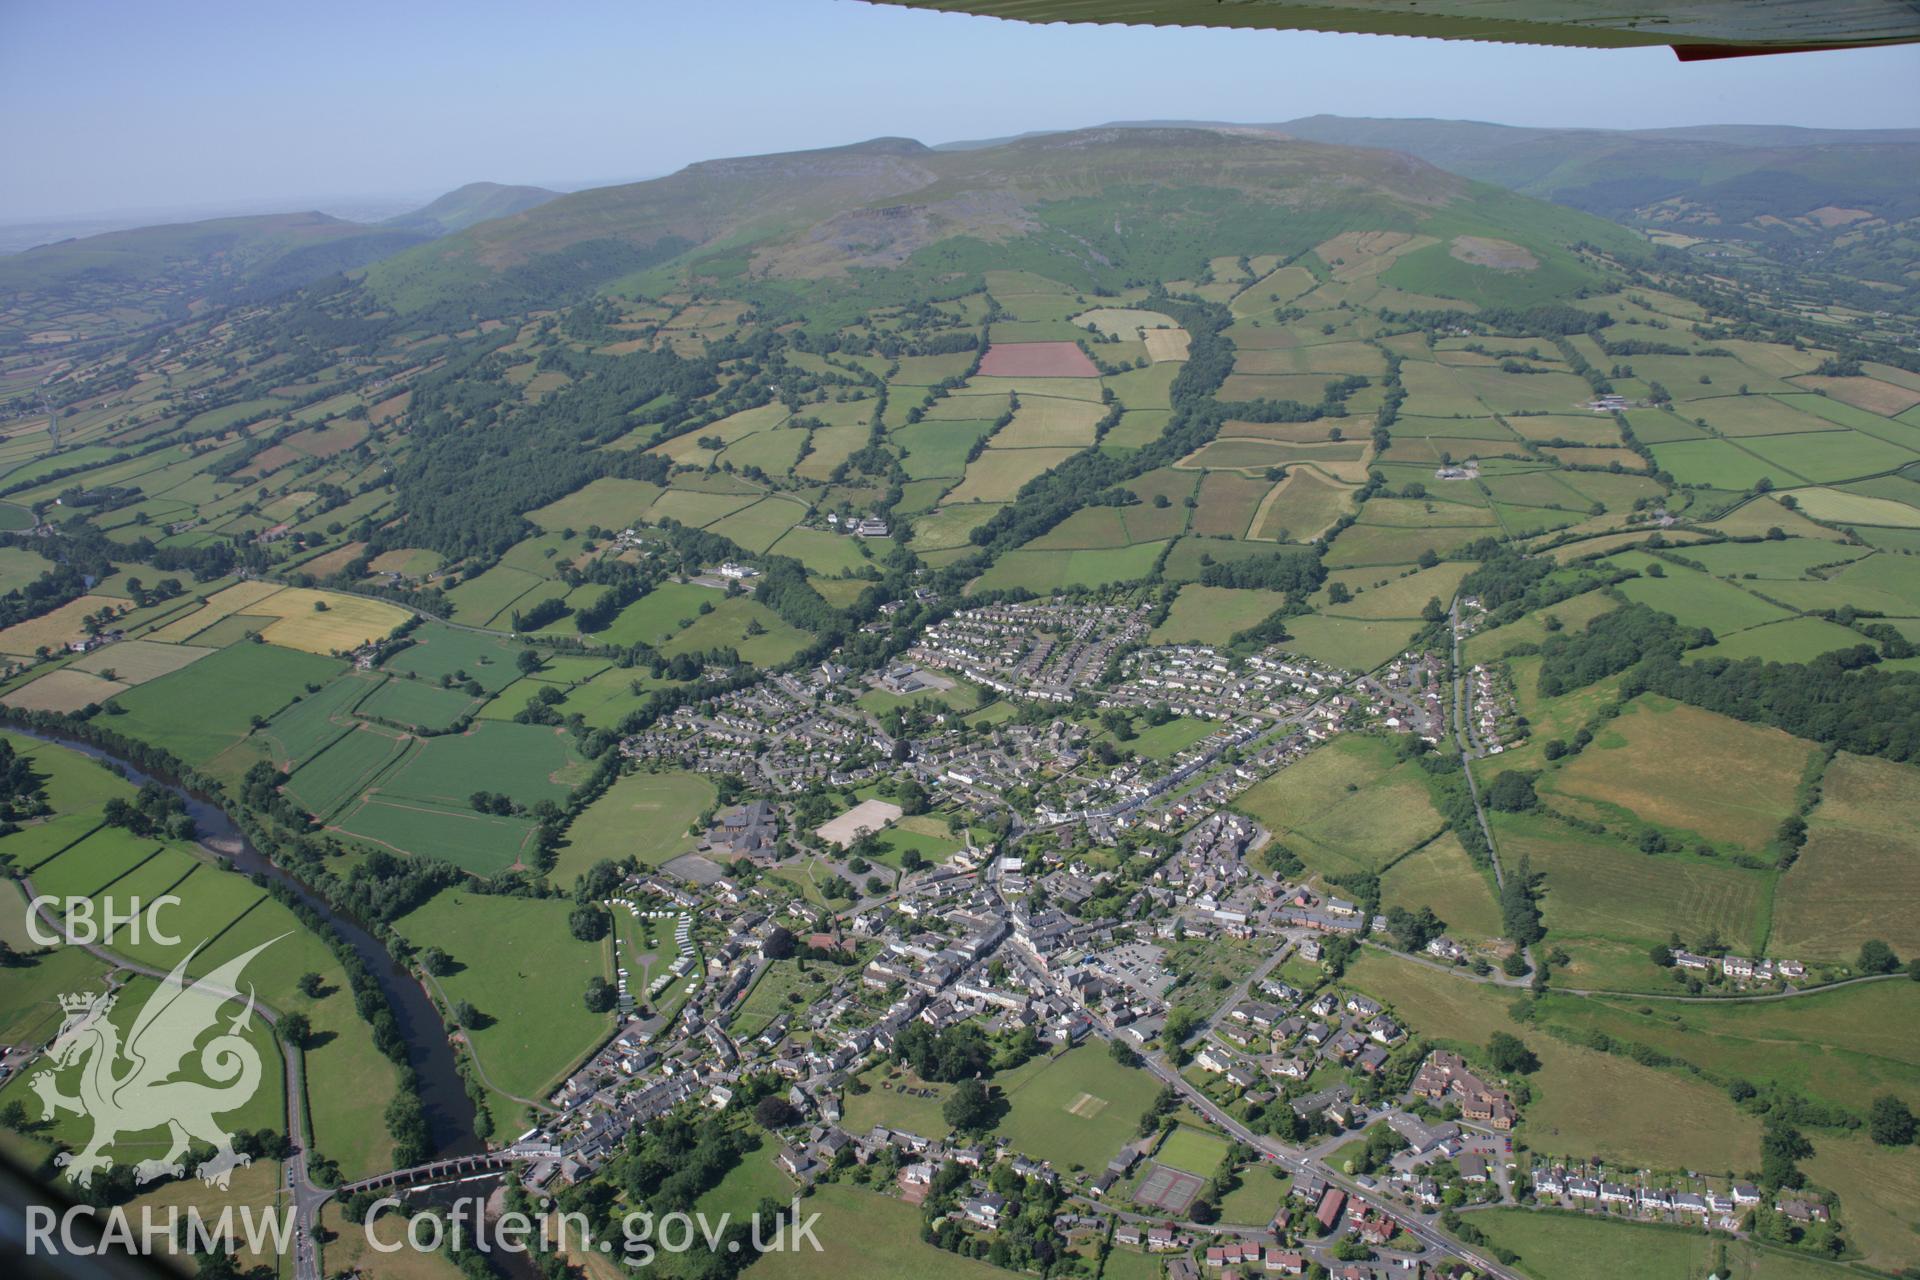 RCAHMW colour oblique aerial photograph of Crickhowell. Taken on 13 July 2006 by Toby Driver.